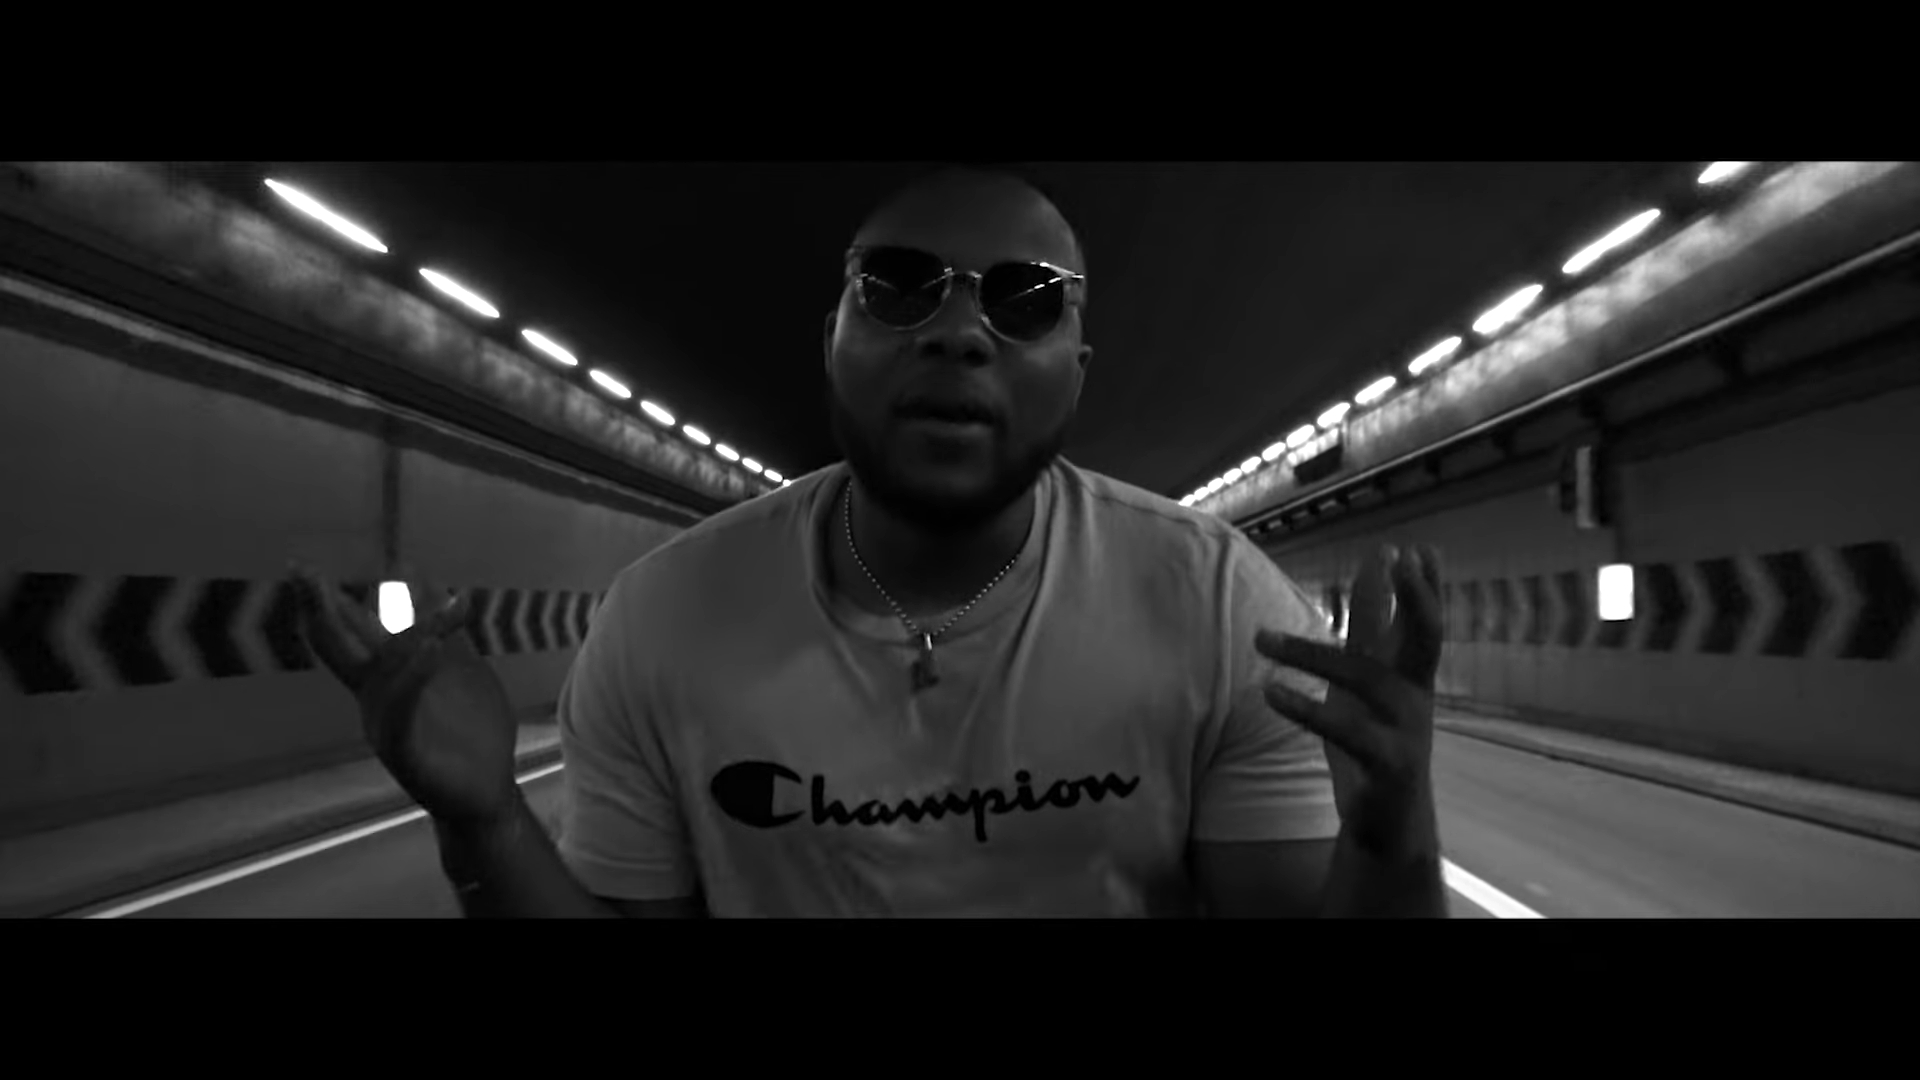 Melvillous returns with a visual for Rocket Man